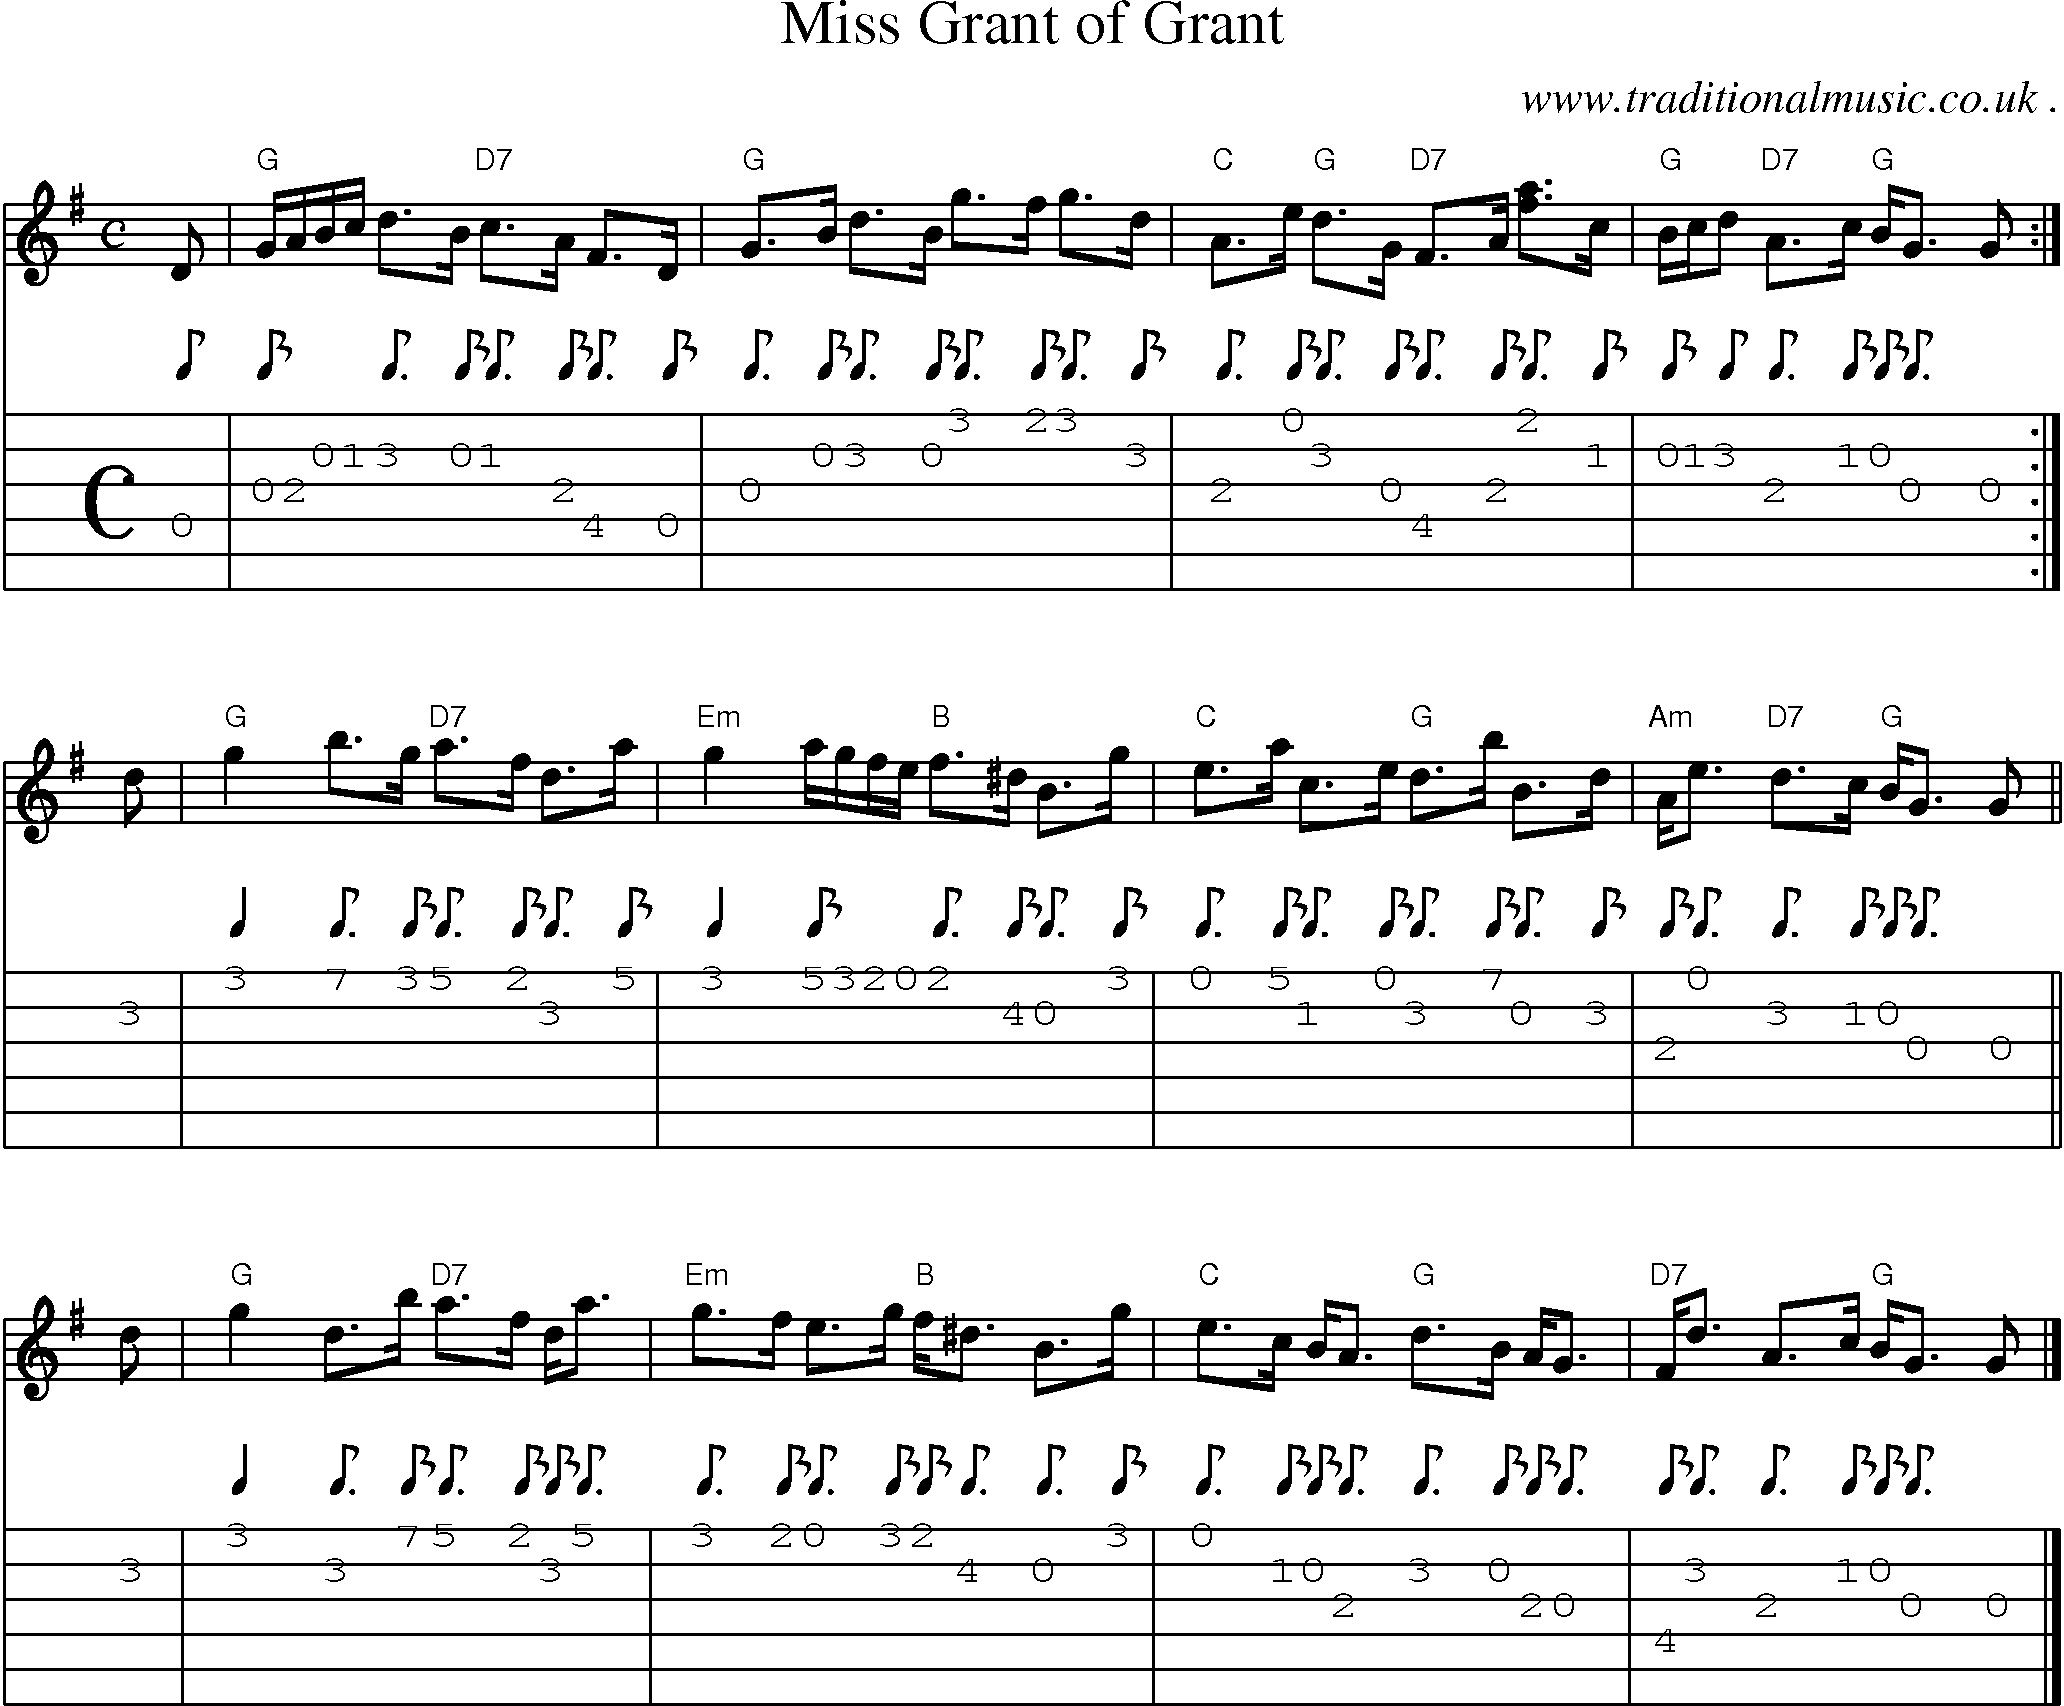 Sheet-music  score, Chords and Guitar Tabs for Miss Grant Of Grant